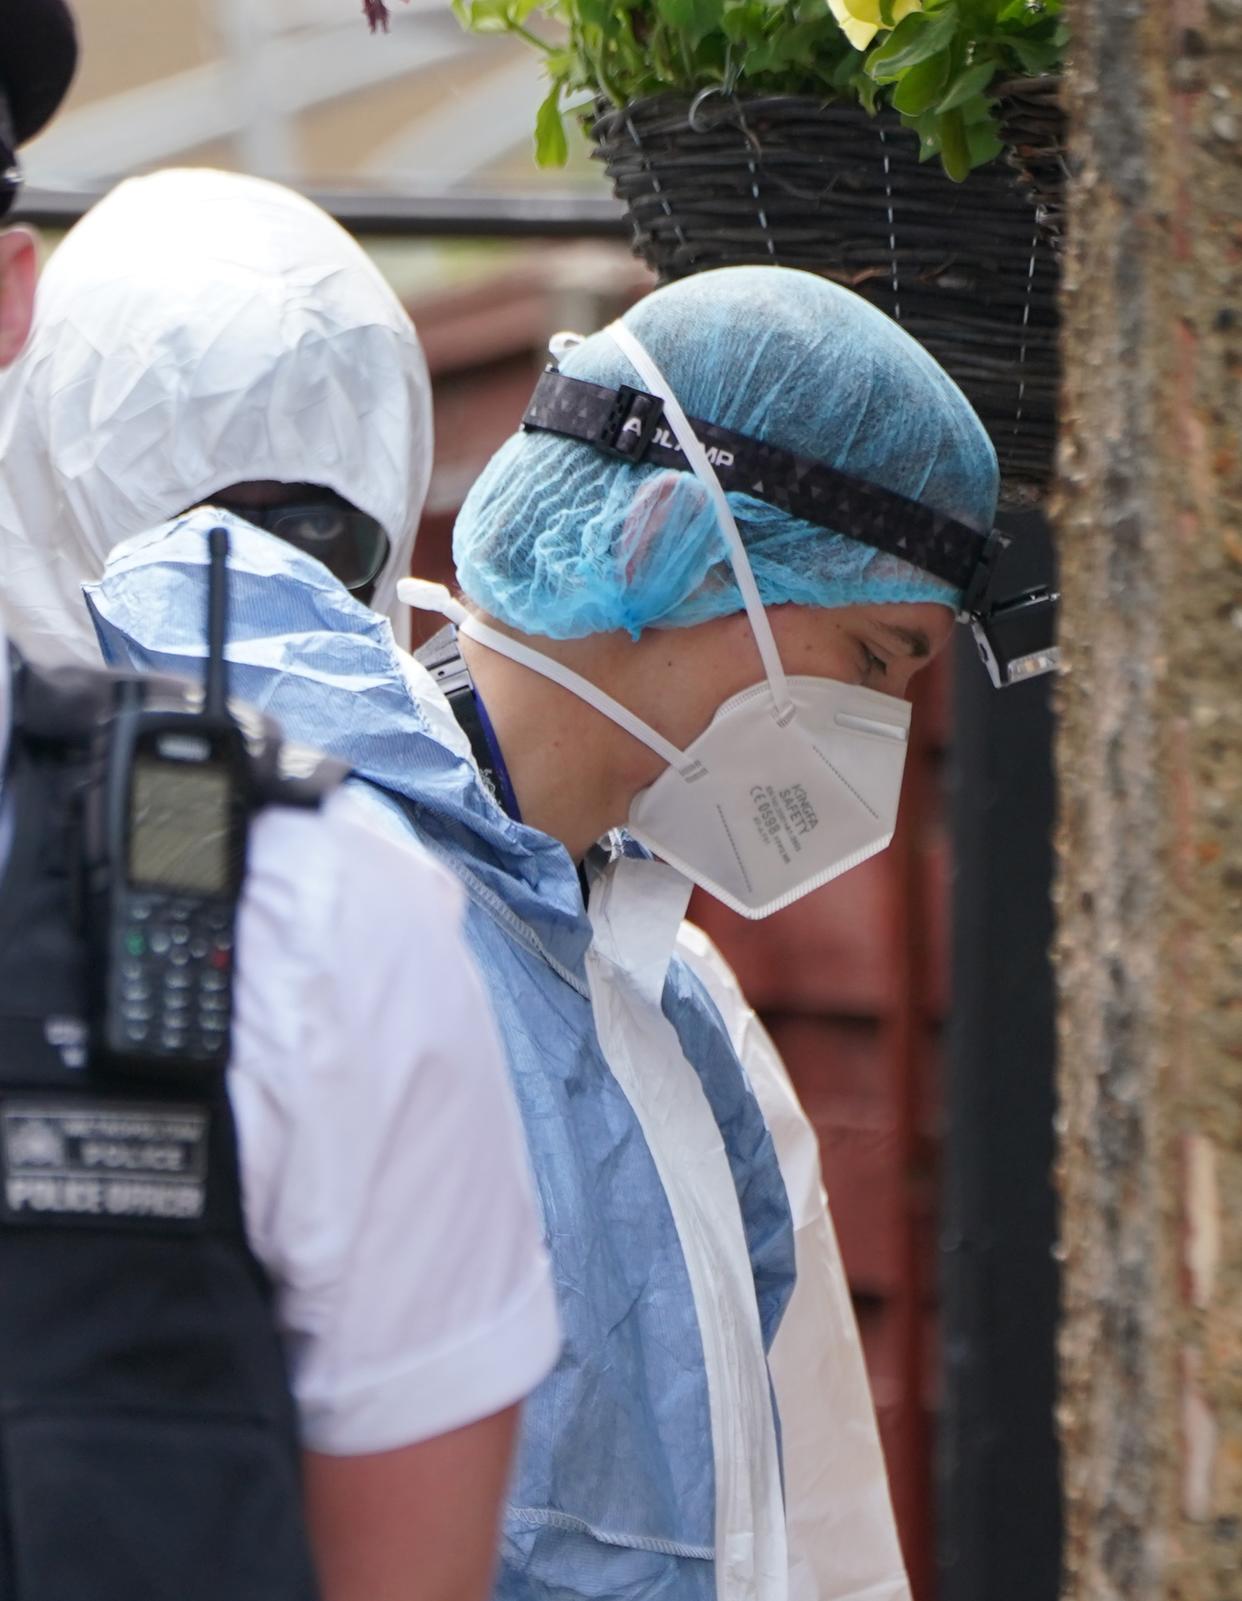 Investigators in Bedfont (Lucy North/PA Wire)